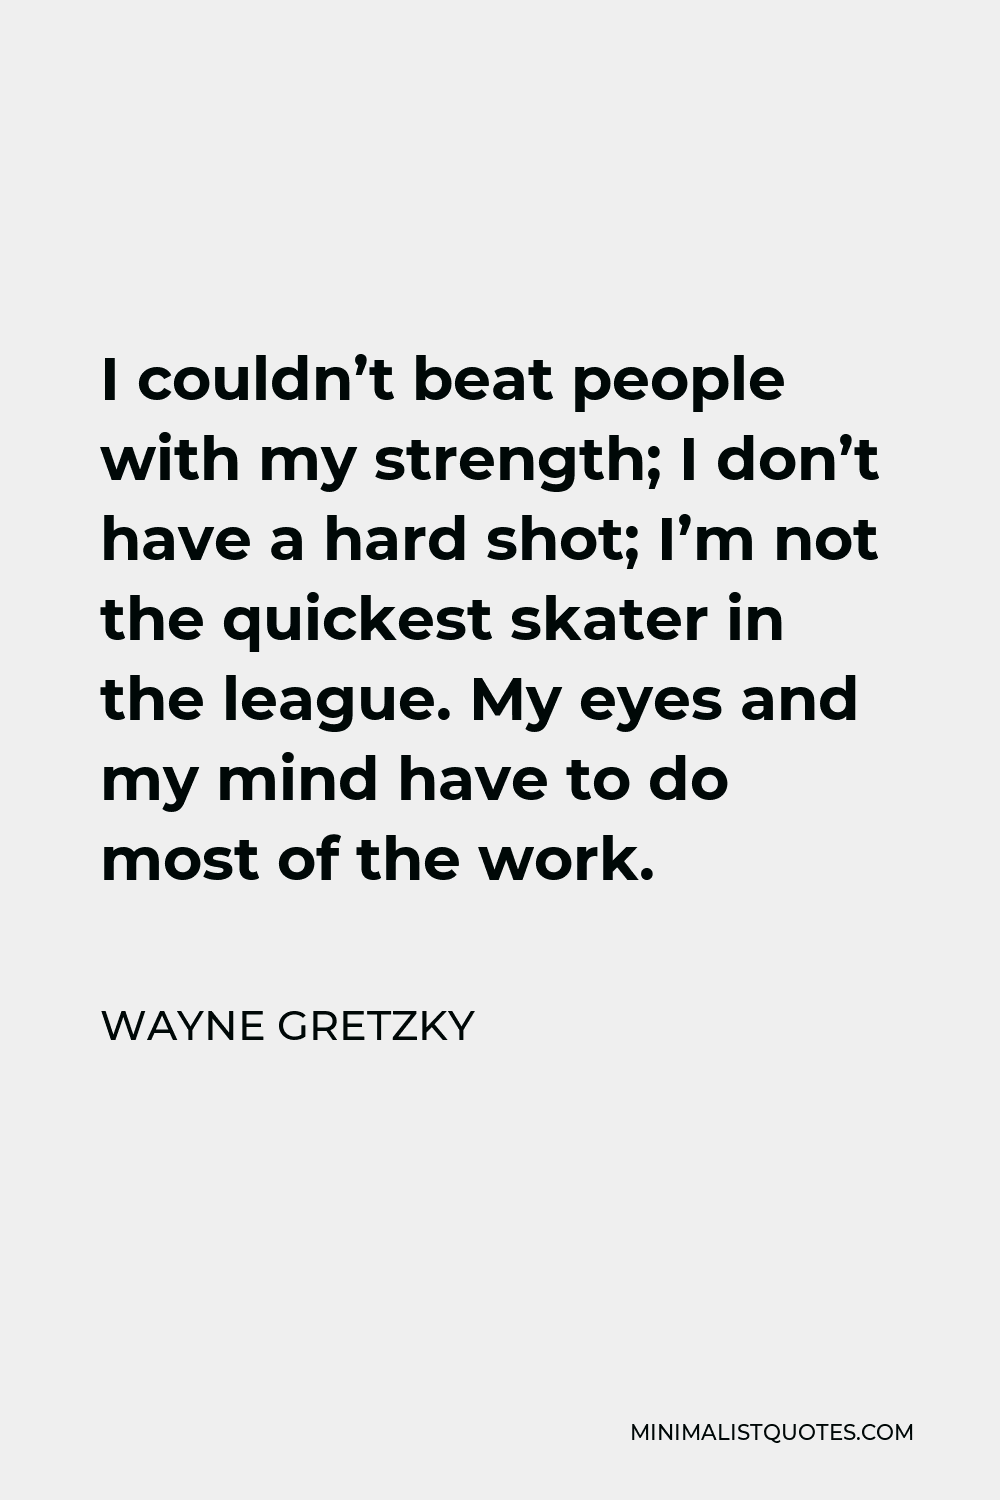 Wayne Gretzky quote: I couldn't beat people with my strength; I